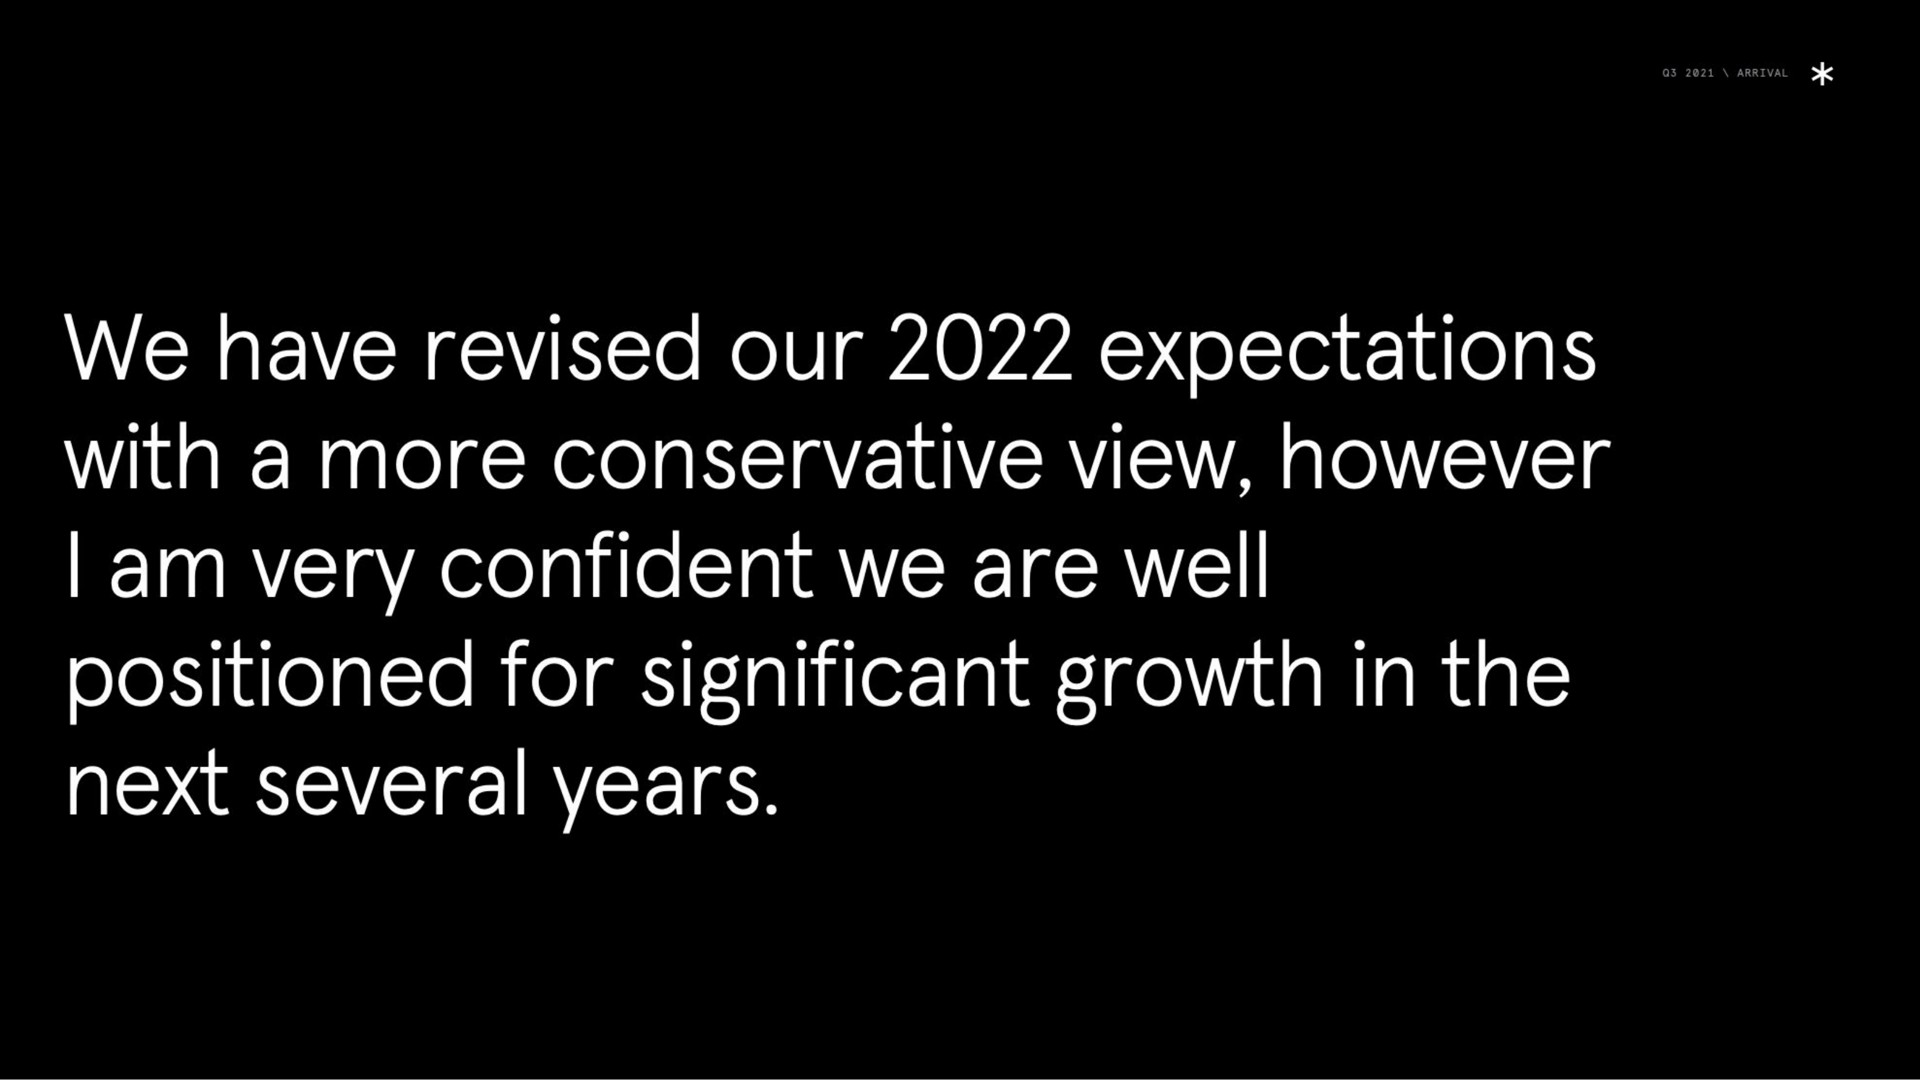 we have revised our expectations with a more conservative view however am very confident we are well positioned for significant growth in the next several years | Arrival